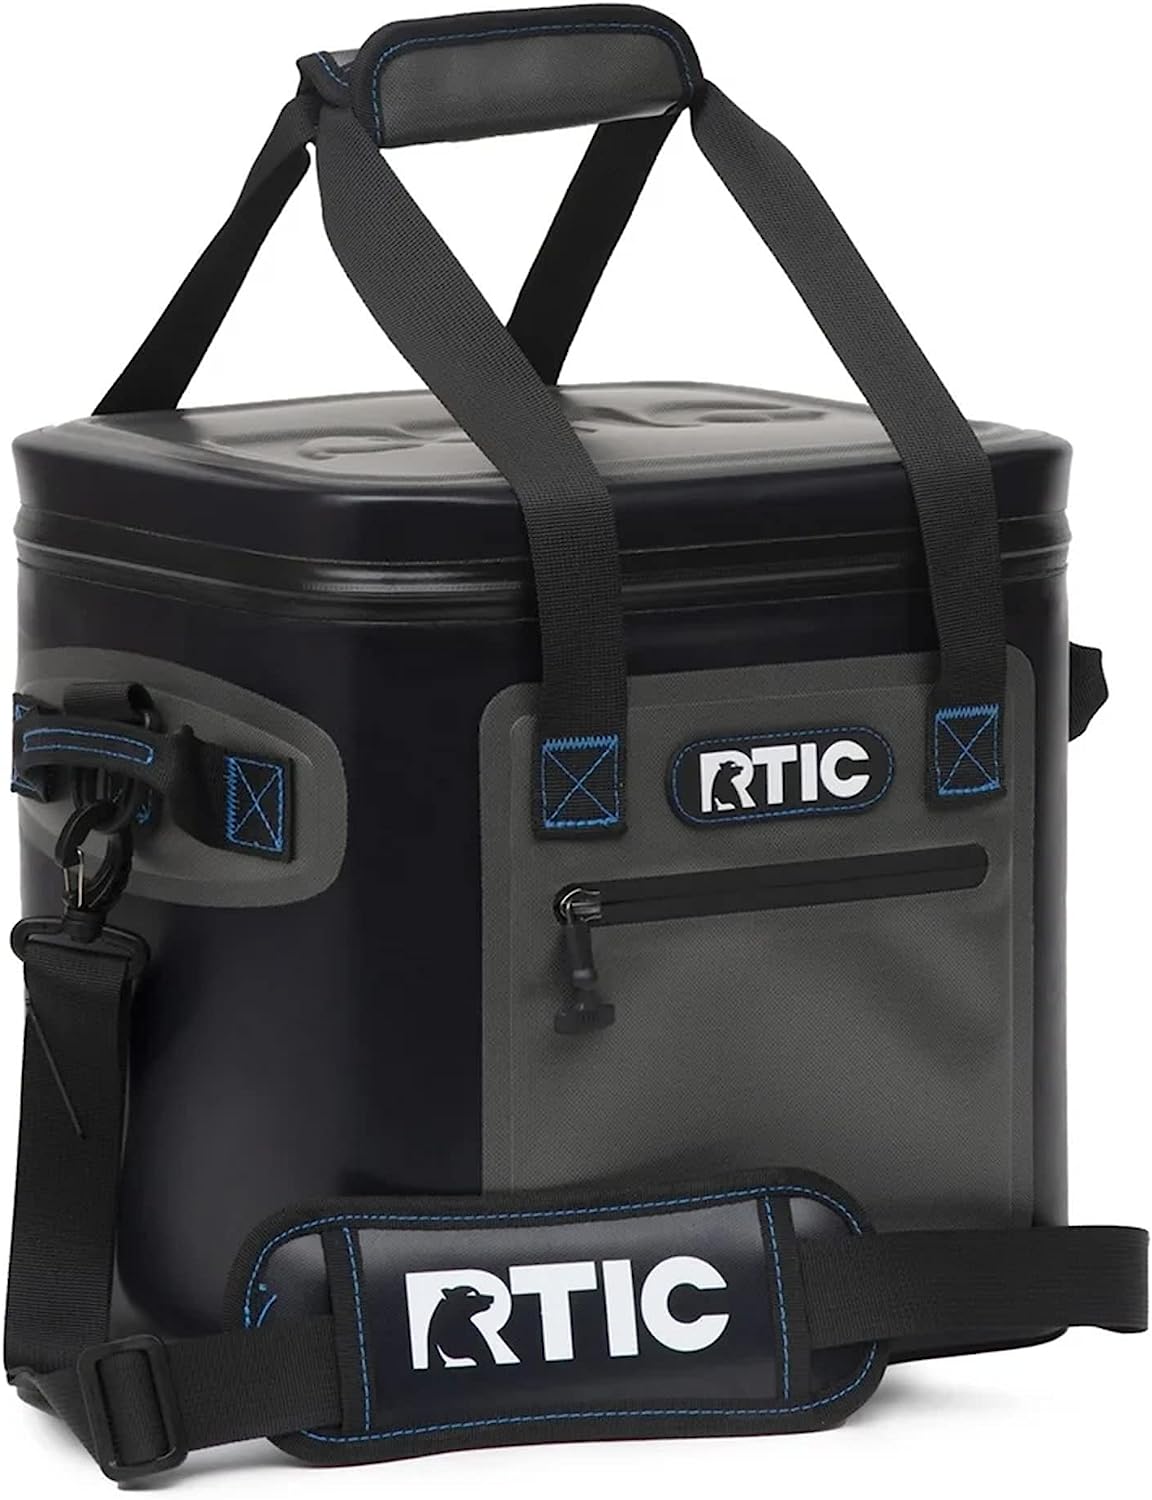 RTIC Soft Cooler Insulated Bag Portable Ice Chest Box [...]